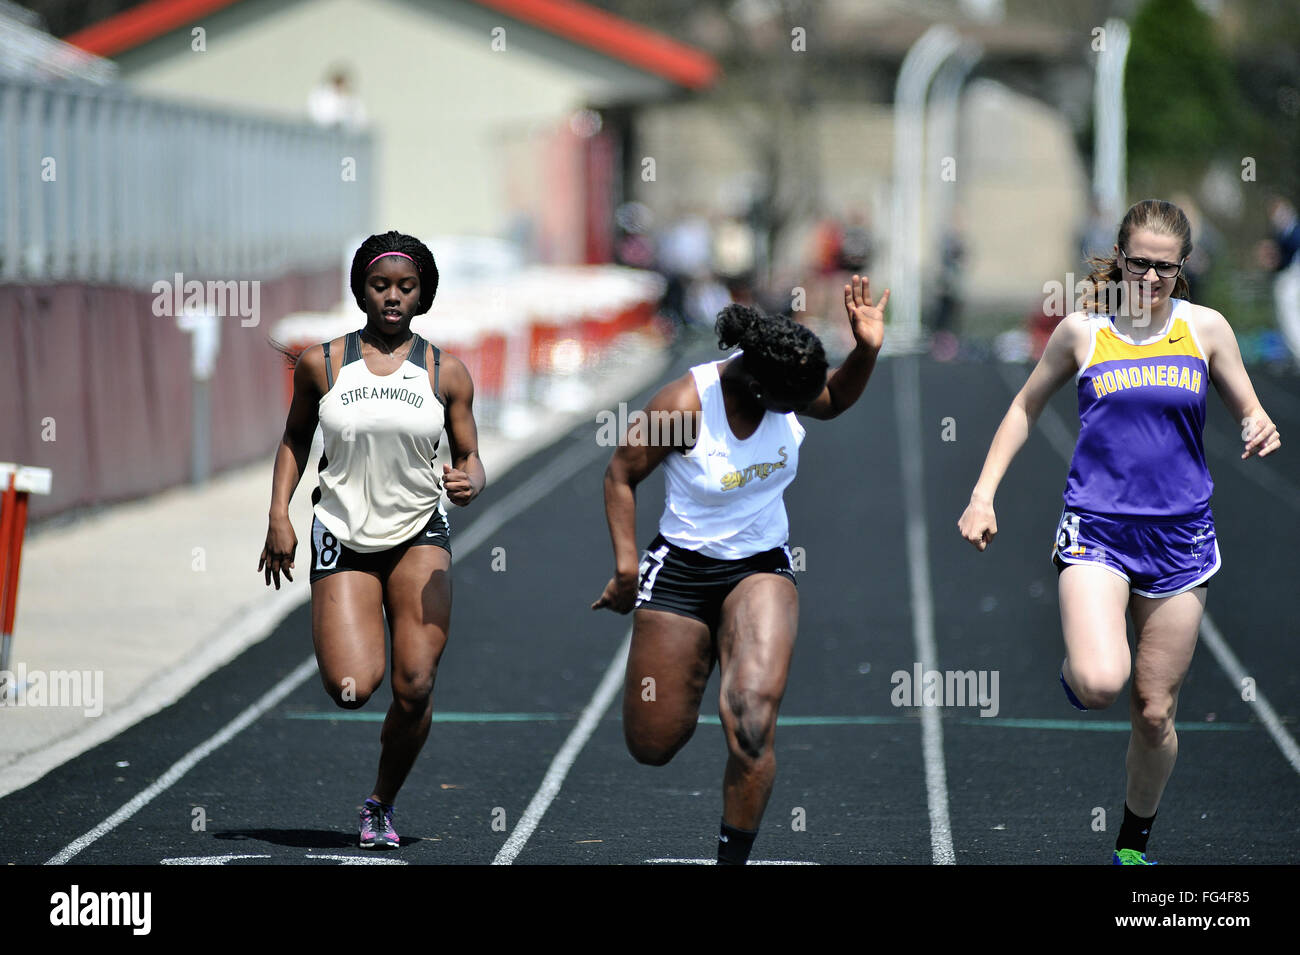 Three high school athletes strain at the finish line in a closely contested 100-meter dash at a high school track meet. USA. Stock Photo